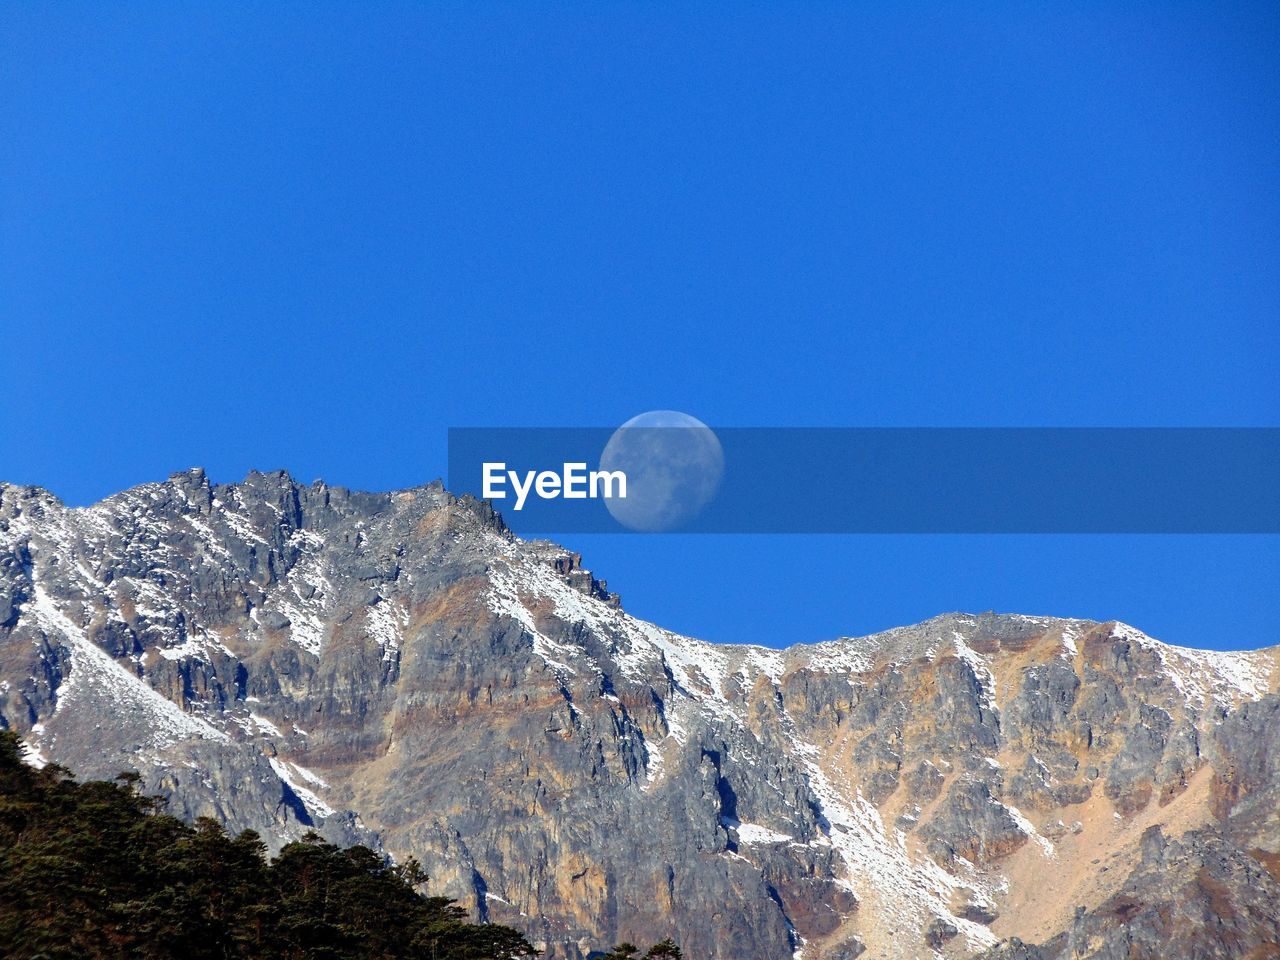 LOW ANGLE VIEW OF SNOWCAPPED MOUNTAIN AGAINST CLEAR BLUE SKY